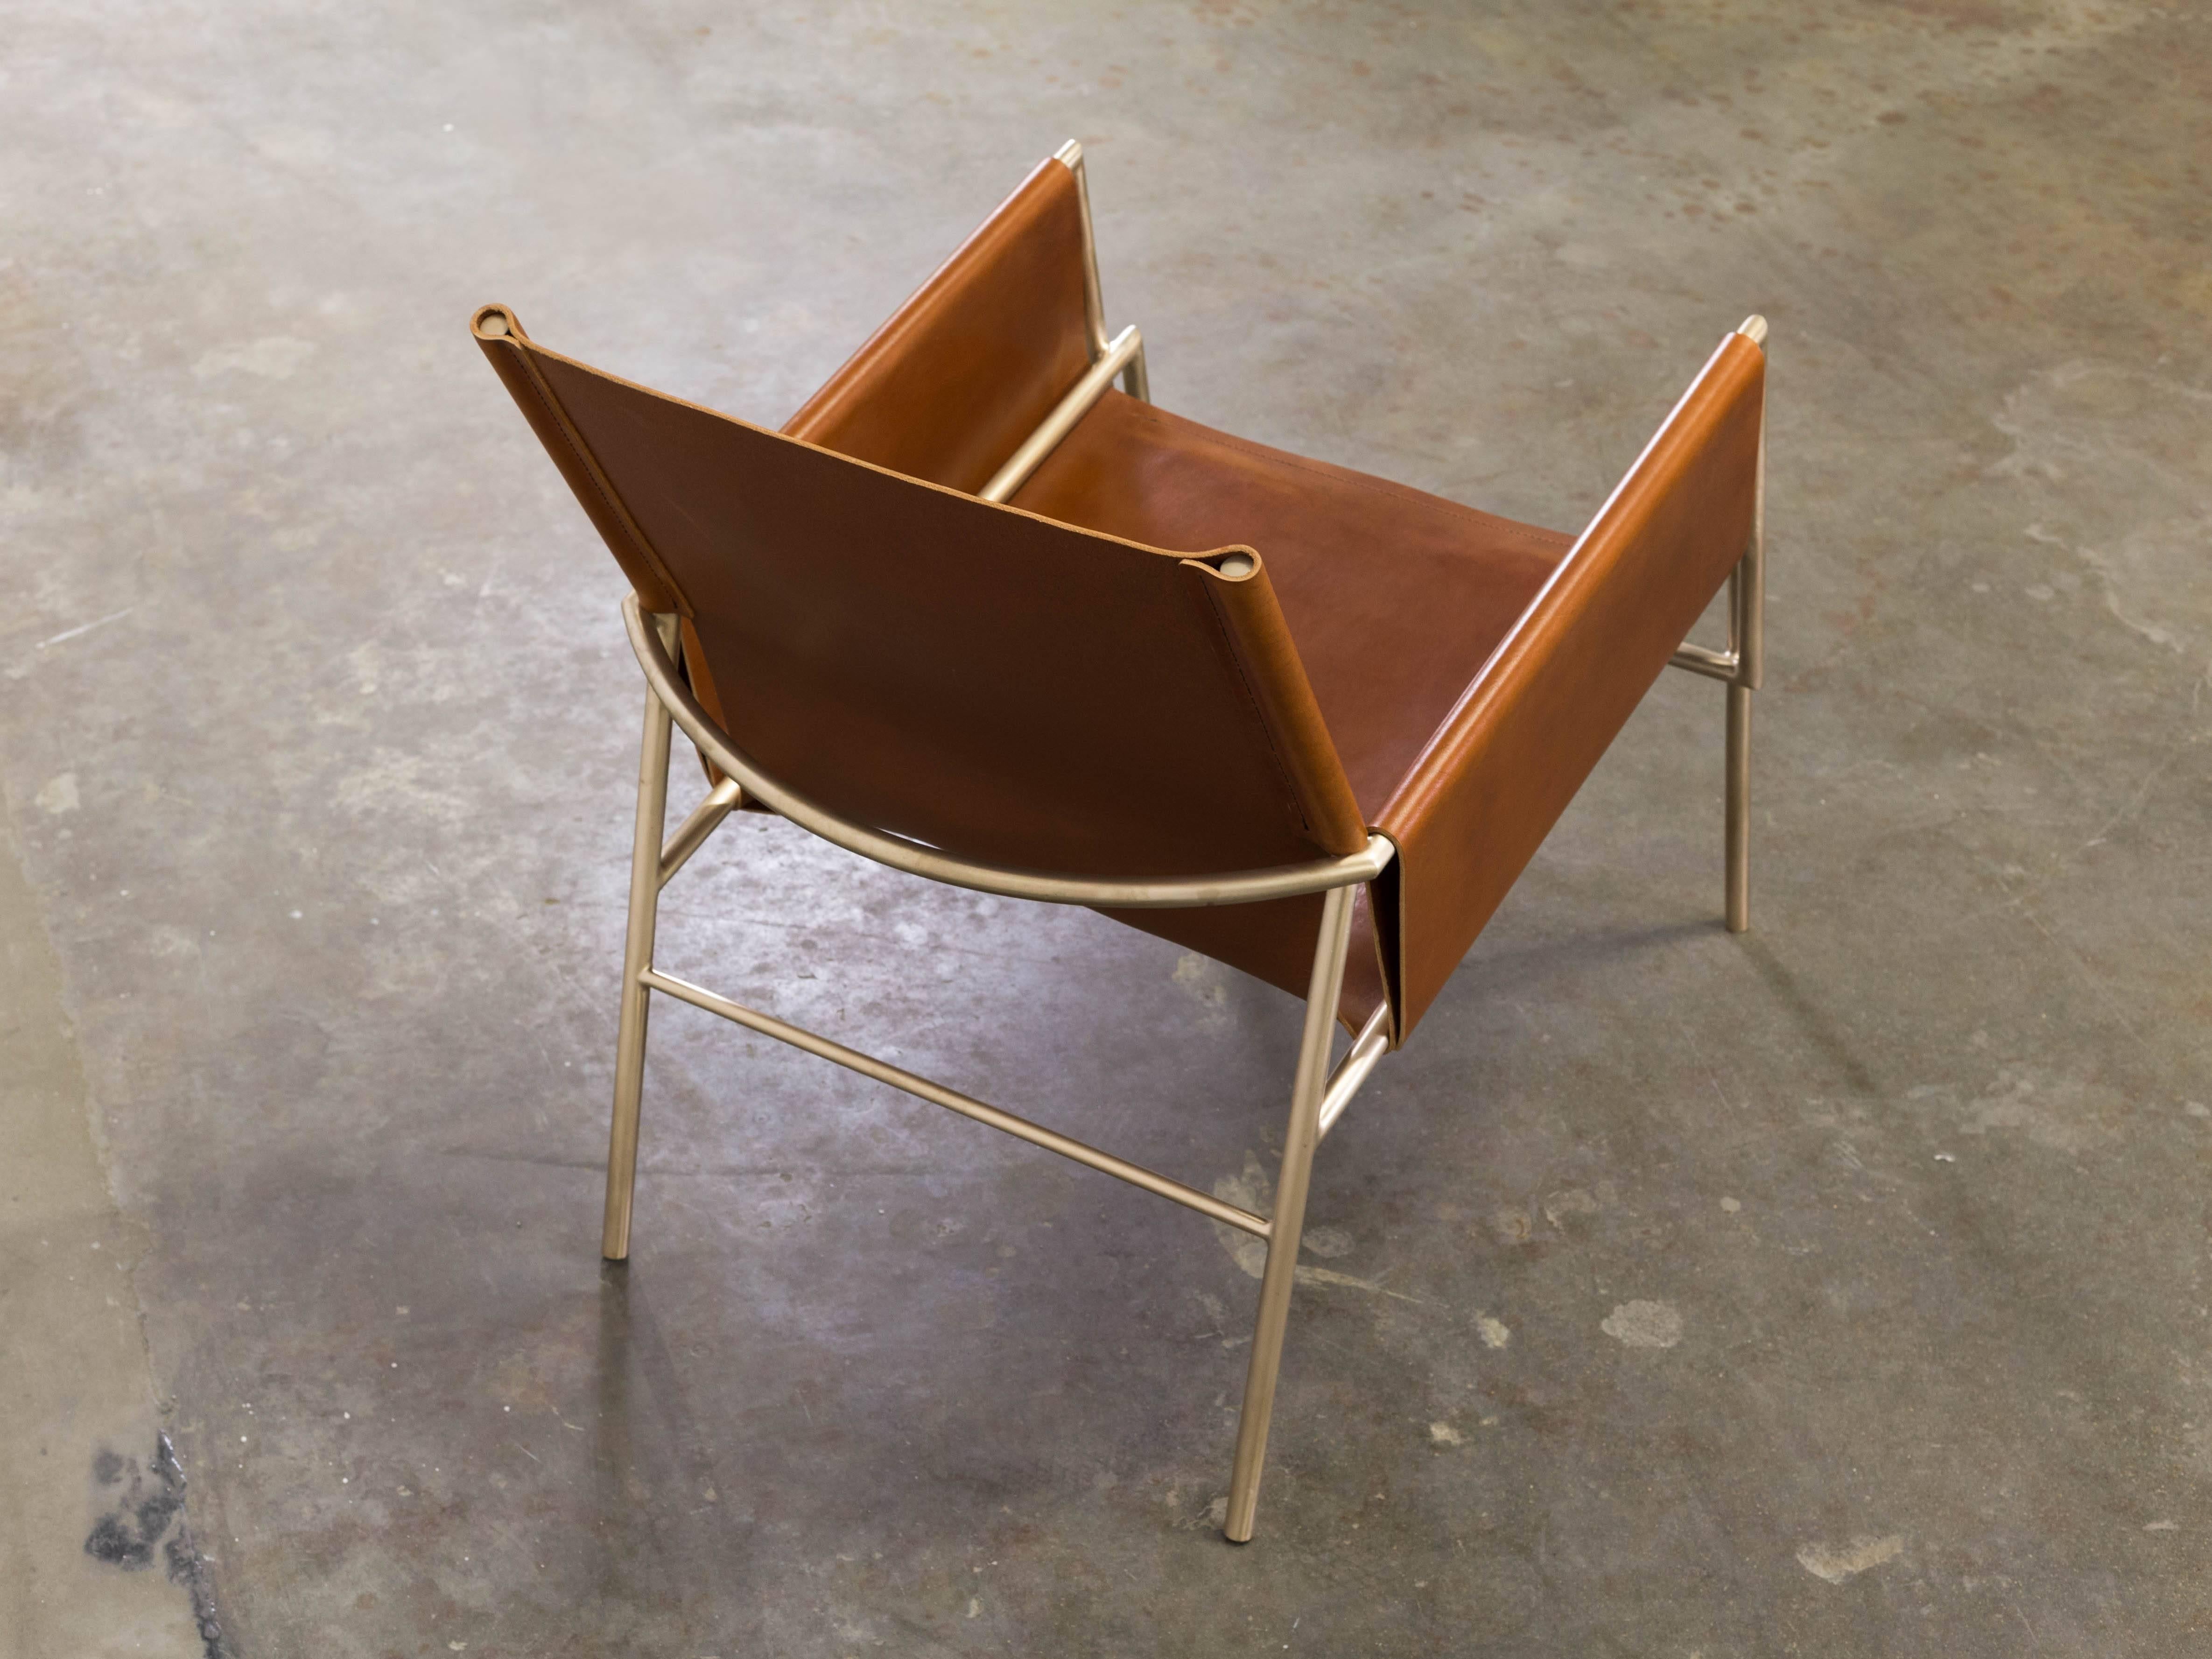 The Lincoln lounge chair consists of a metal frame and a single full grain leather hide, tensioned with adjustable cord lacing underneath the seat. The frame is finished to a fine even polish, with all connections blended and obscured. 

Shown in